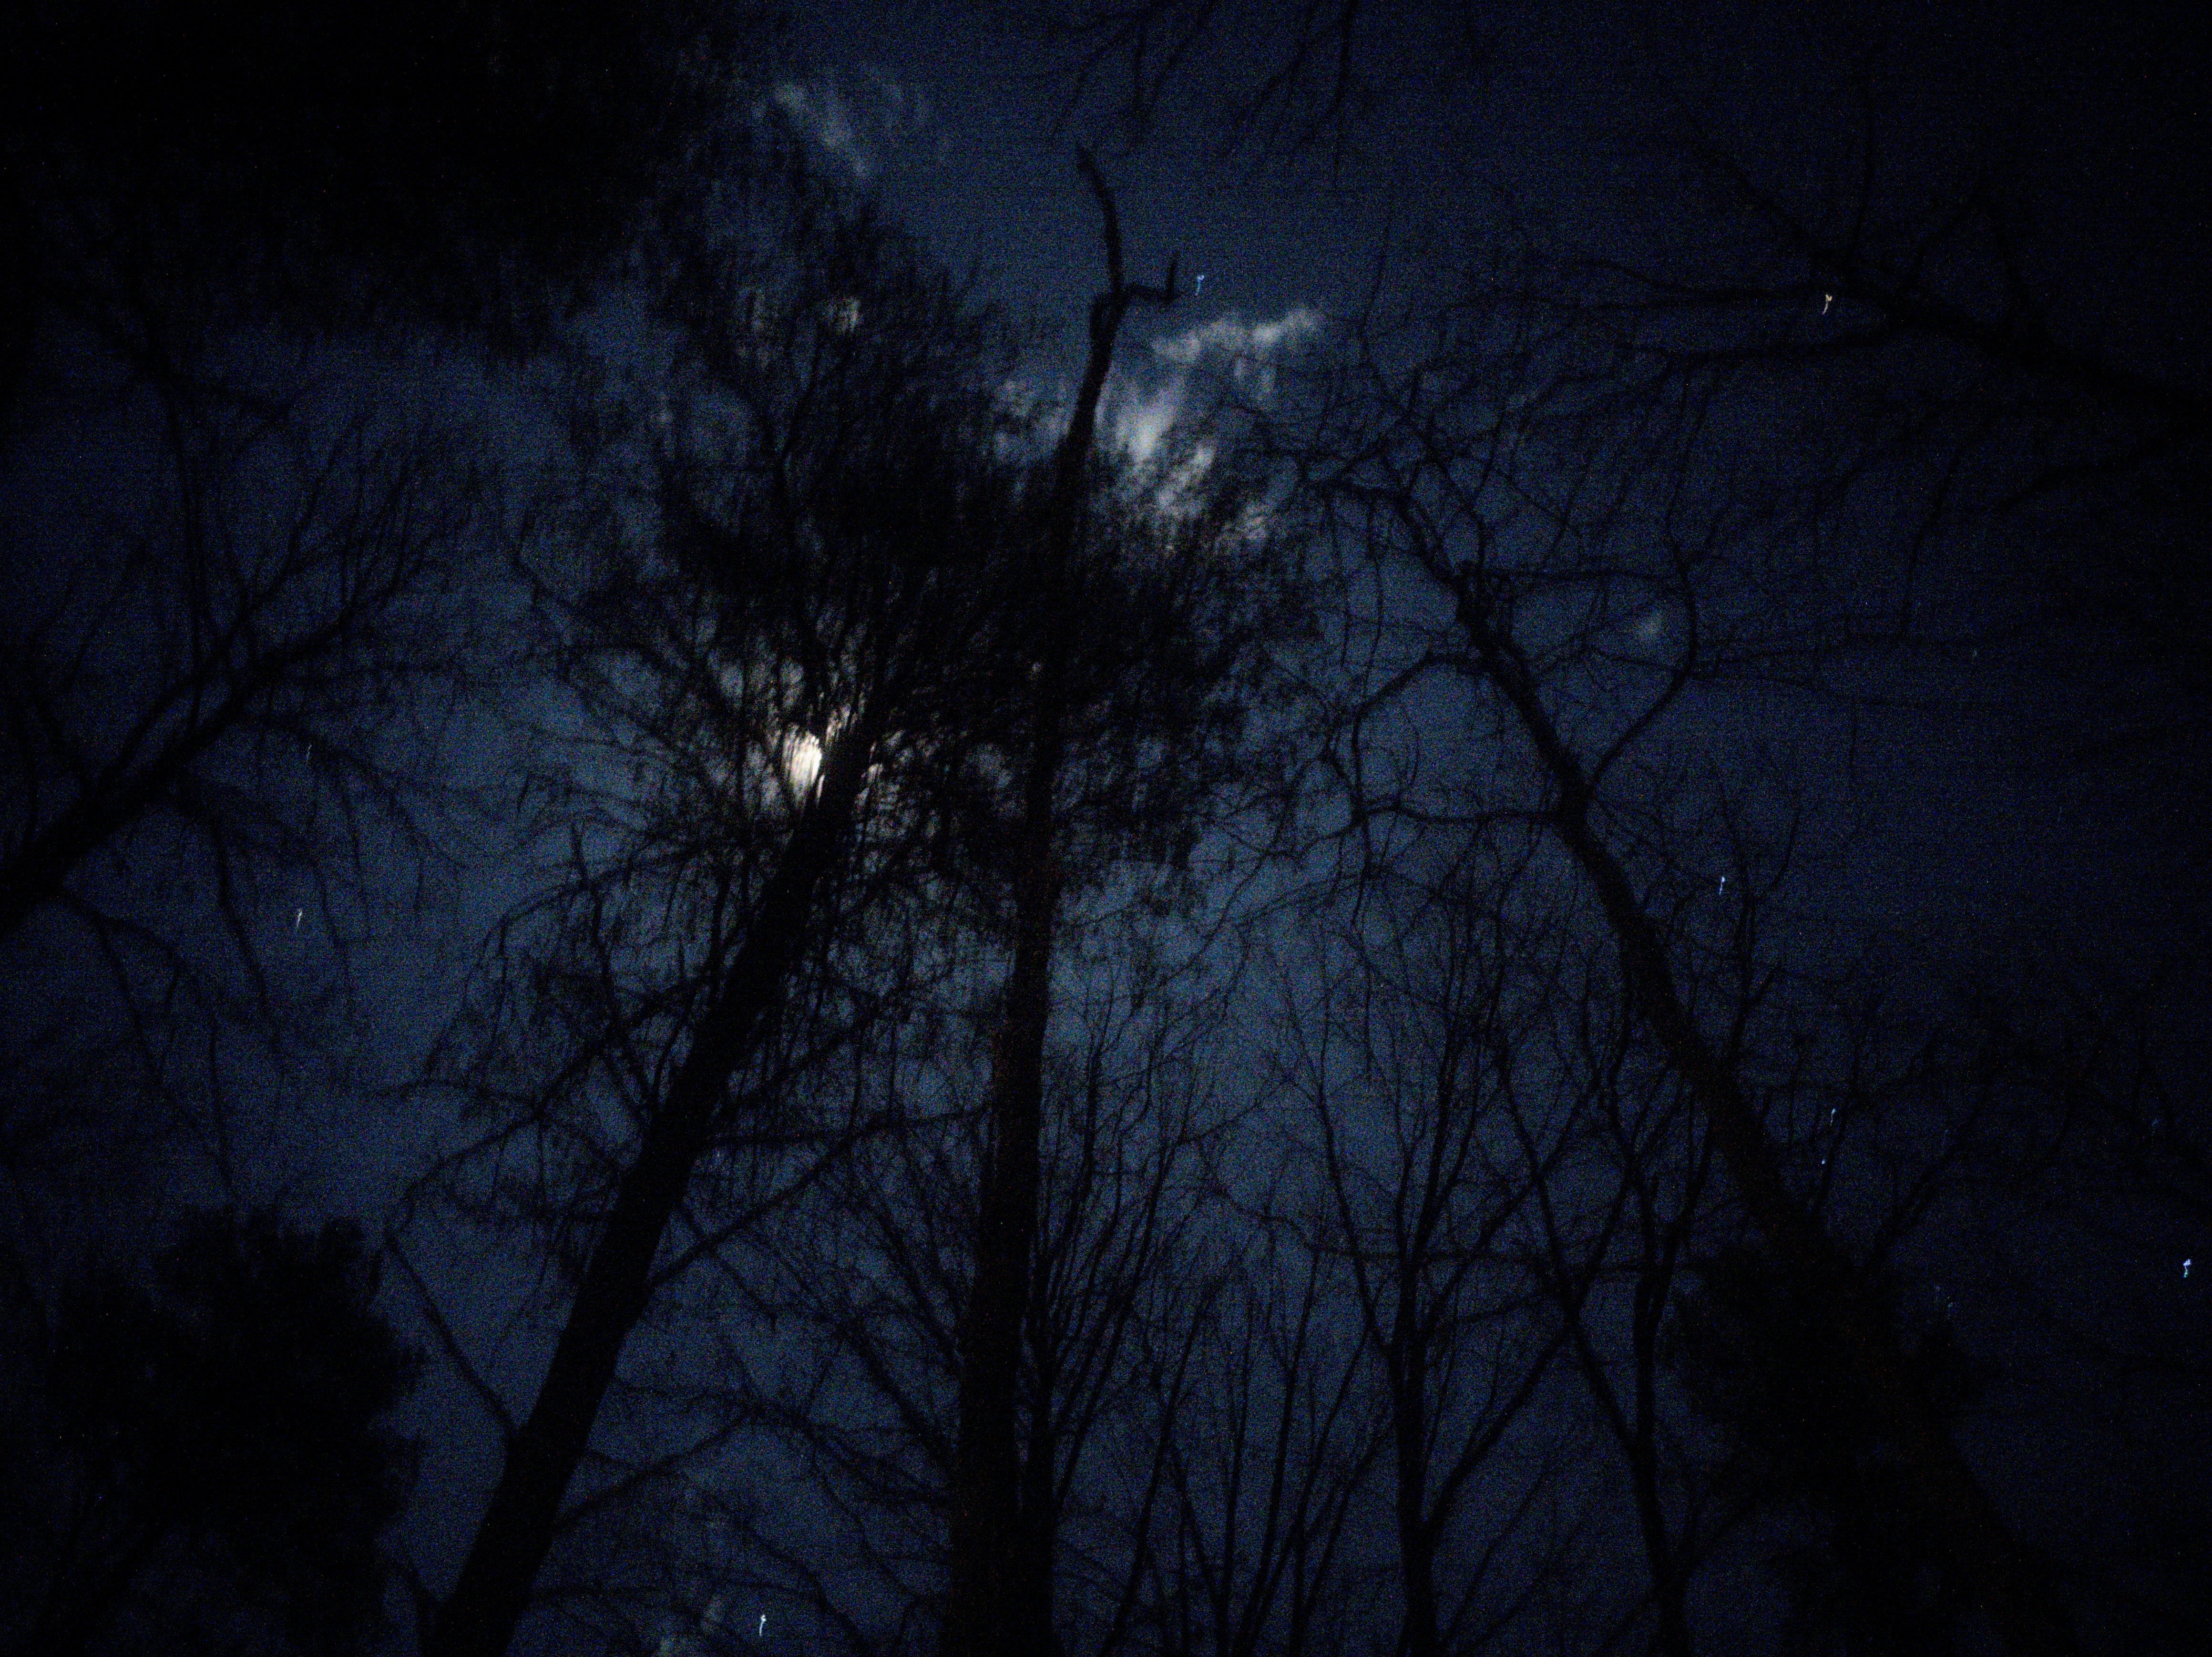 Moon through the trees at our site